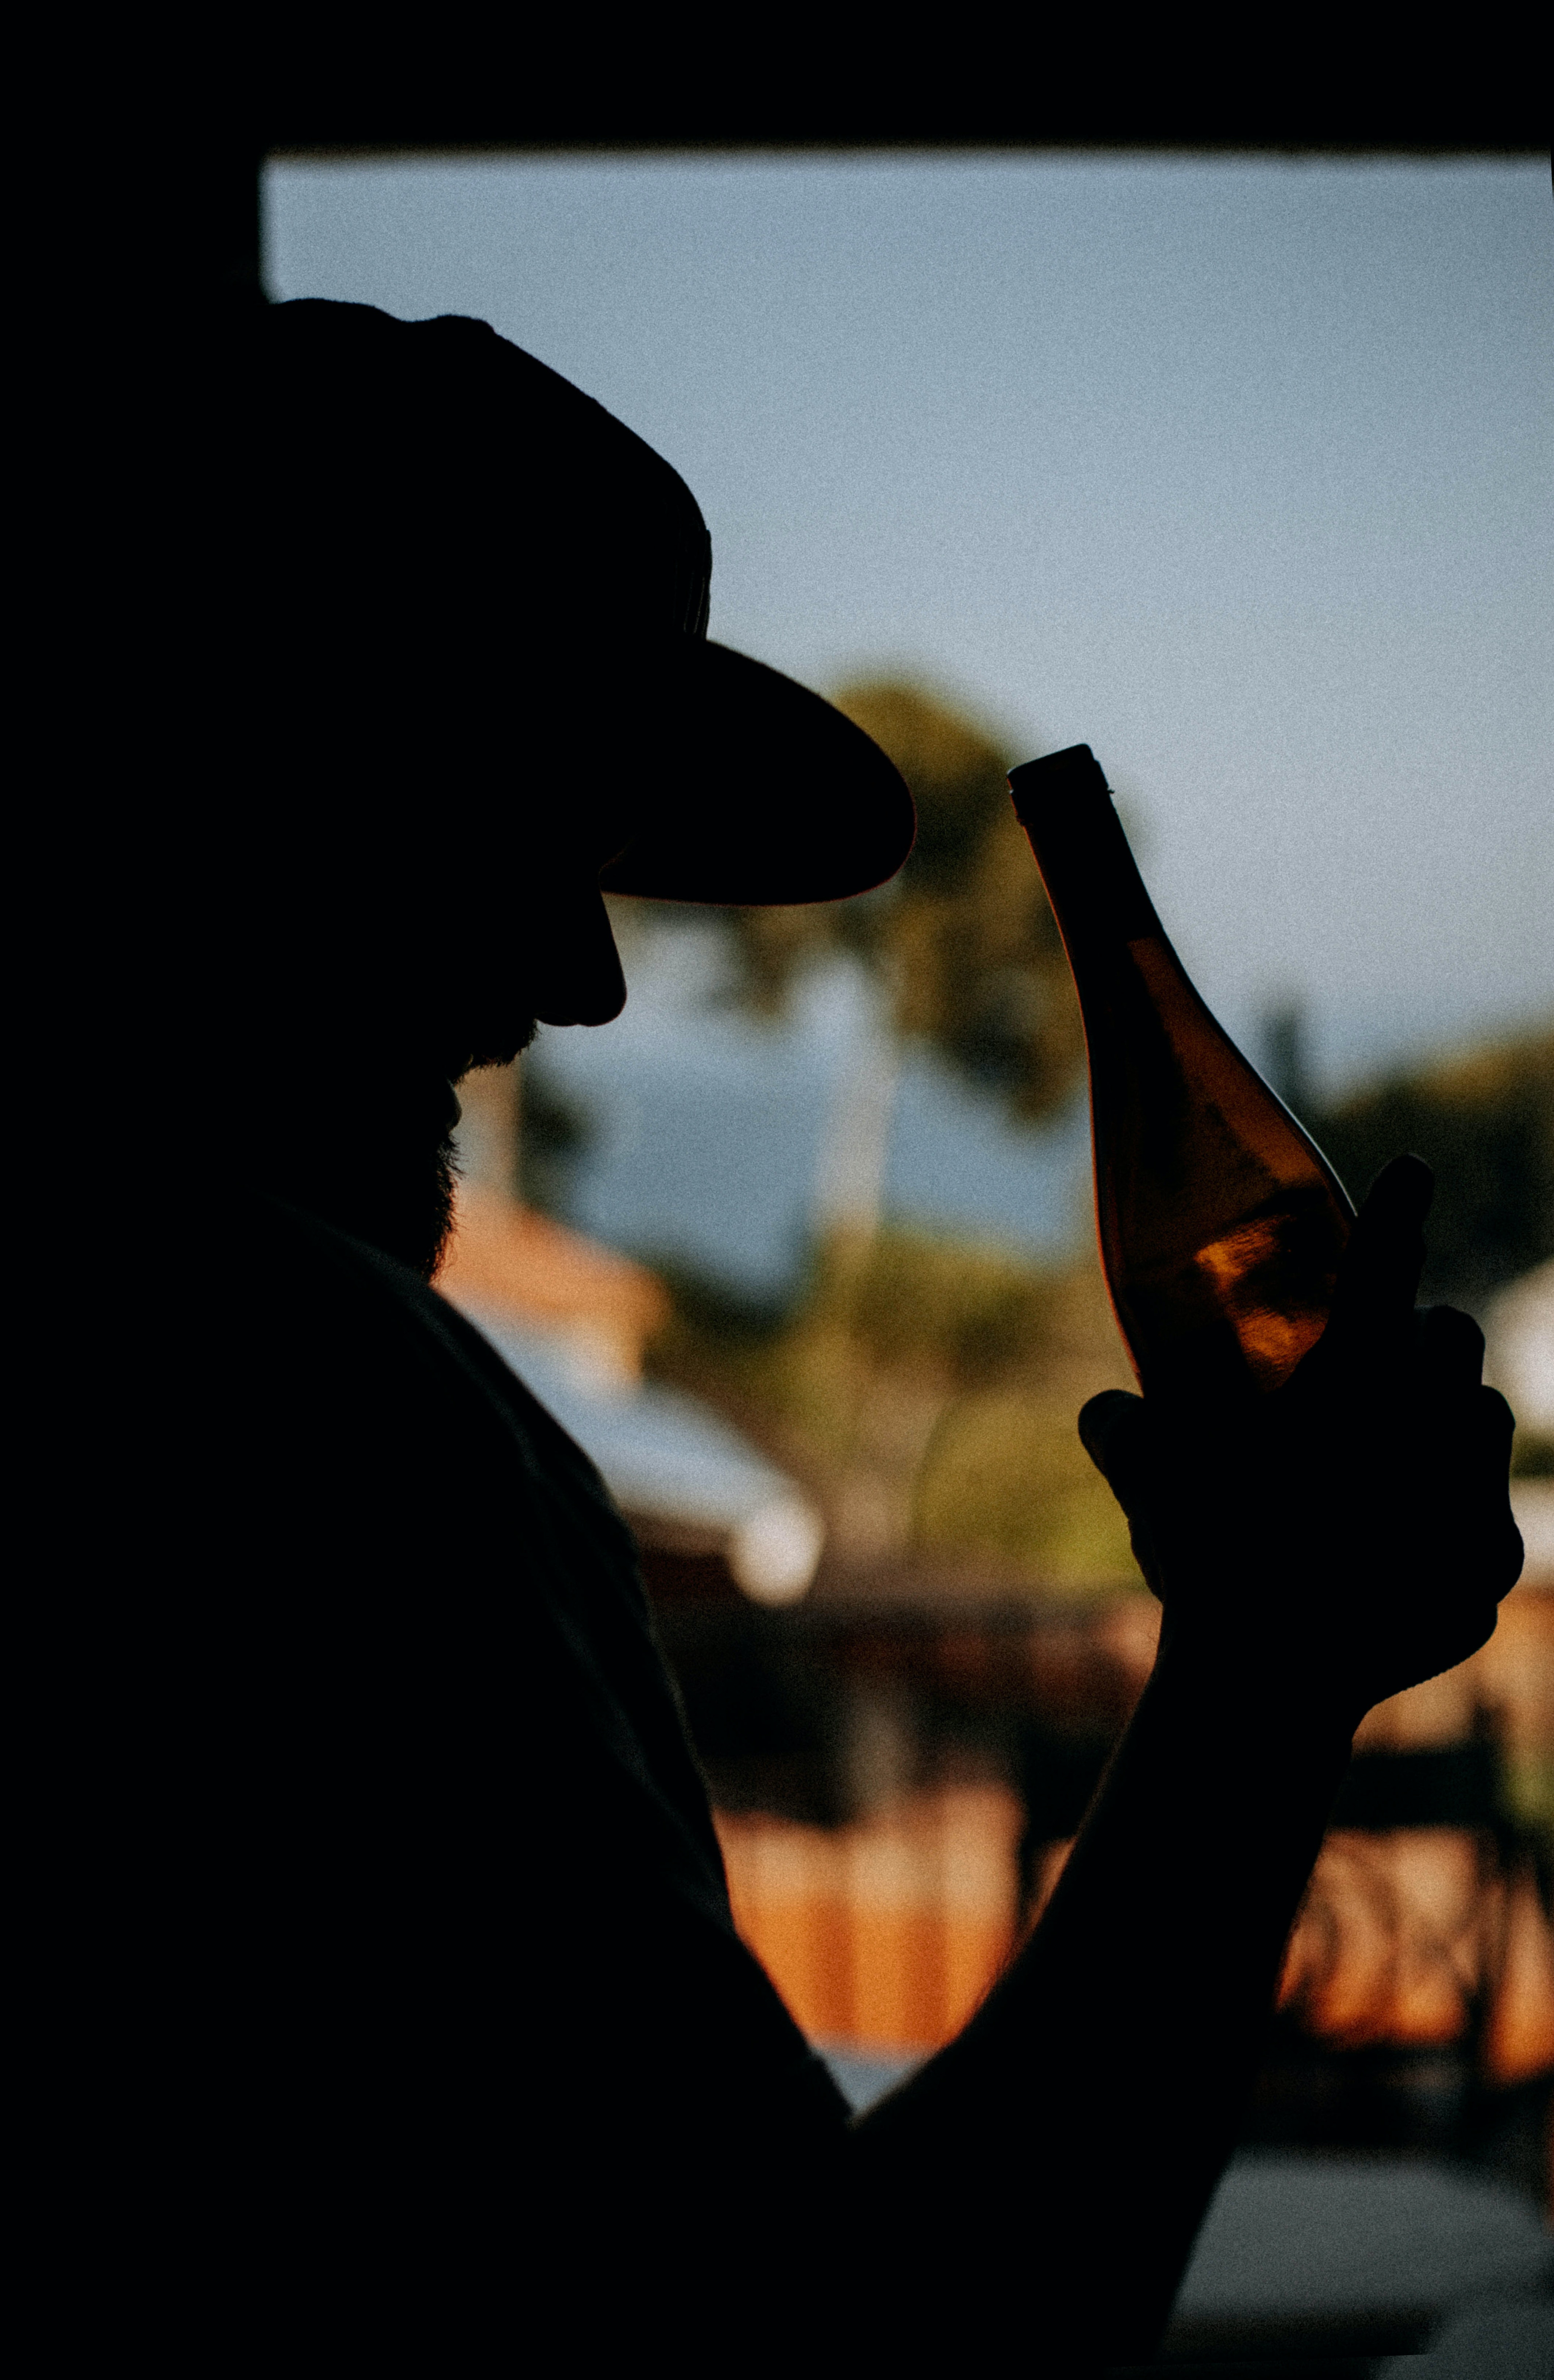 Silhouette of a person holding a bottle of beer | Source: Pexels